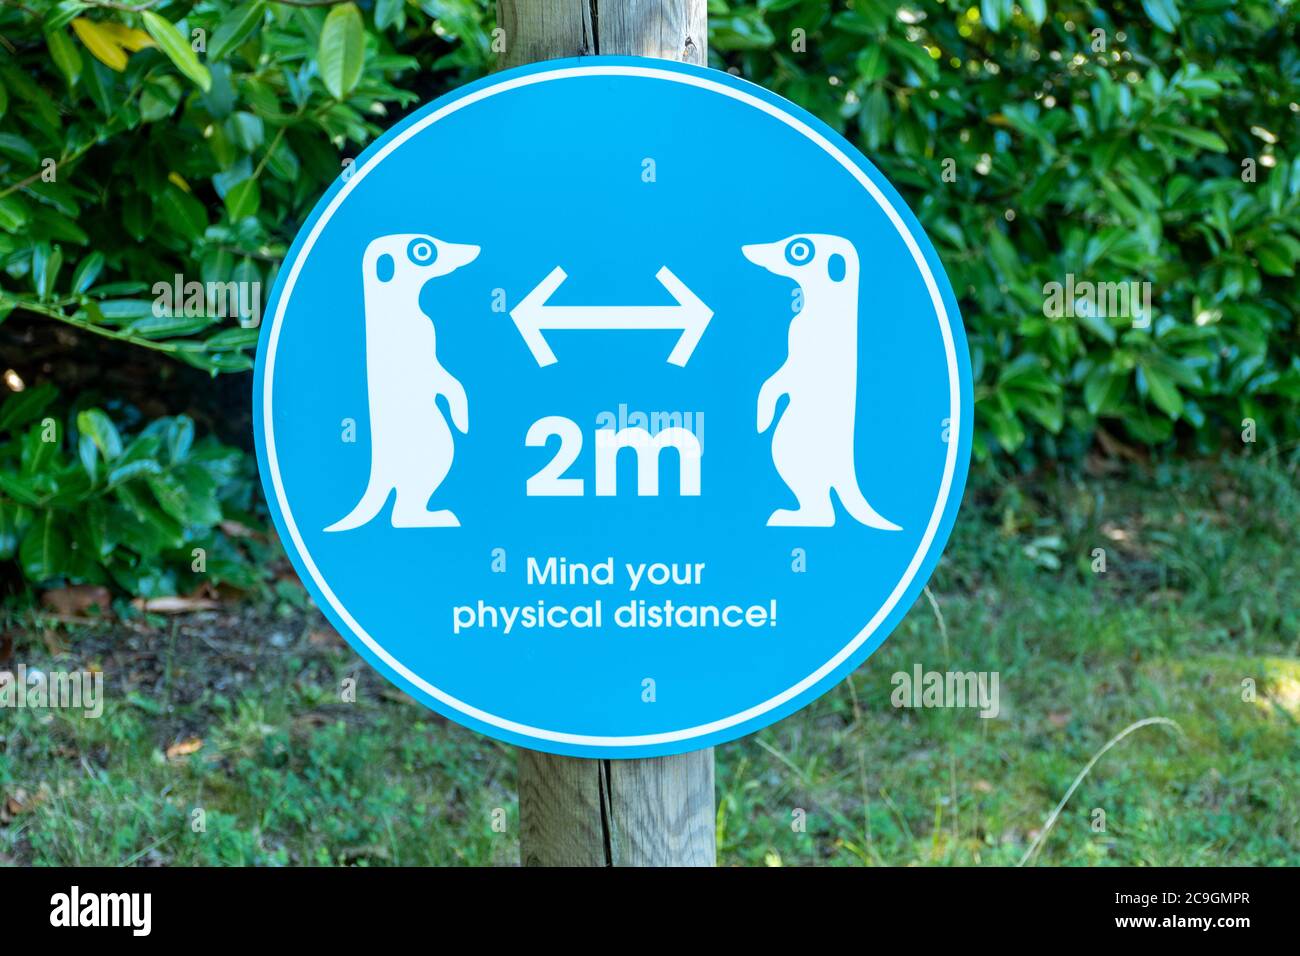 Amusing sign about coronavirus covid-19 social distancing safety rules at a zoo after lockdown eased, UK, July 2020 Stock Photo